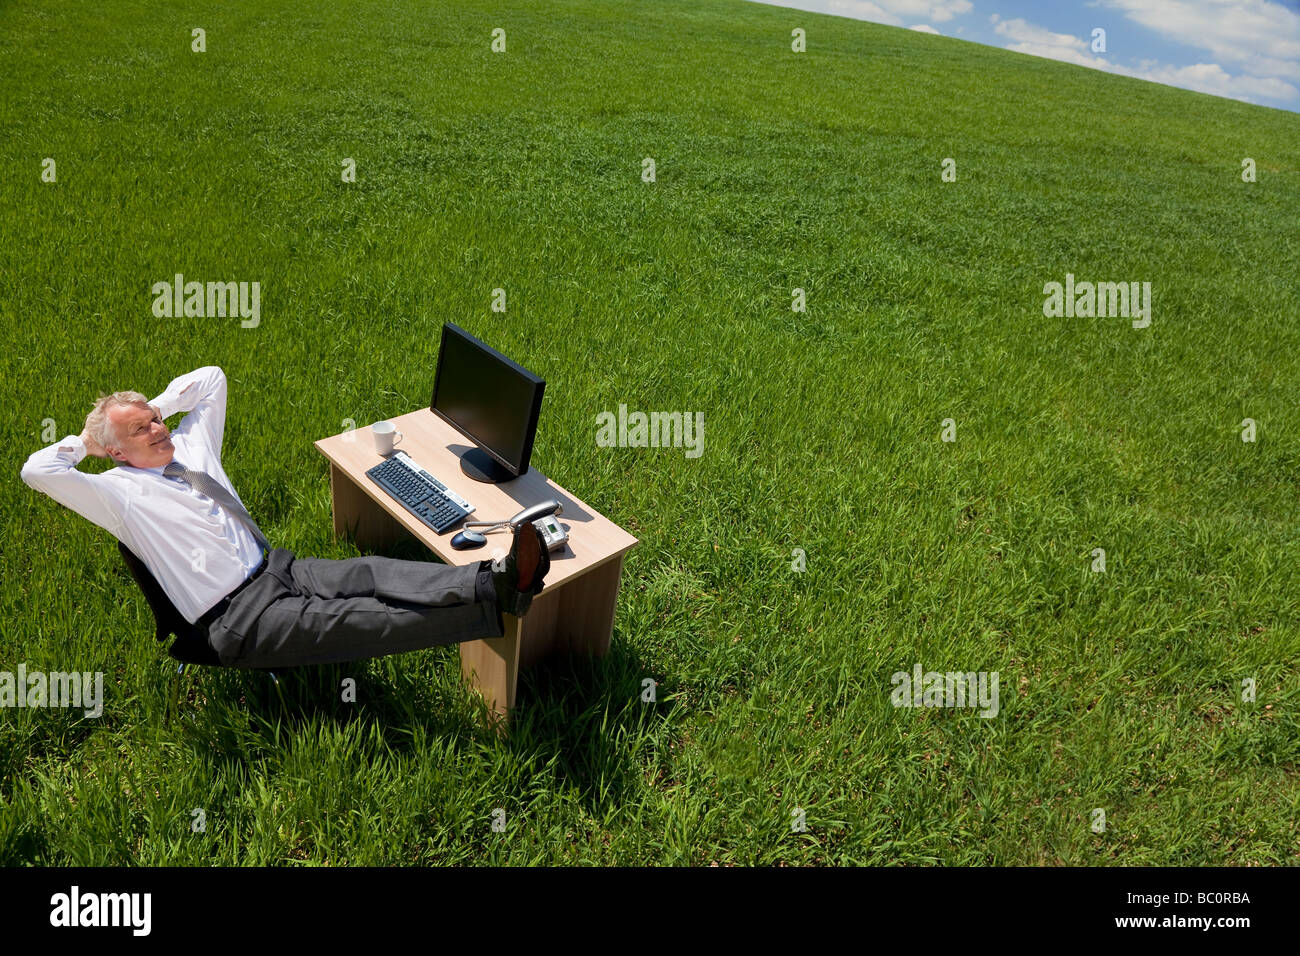 Business concept shot showing an older male executive relaxing at his desk in a green field with a blue sky Stock Photo